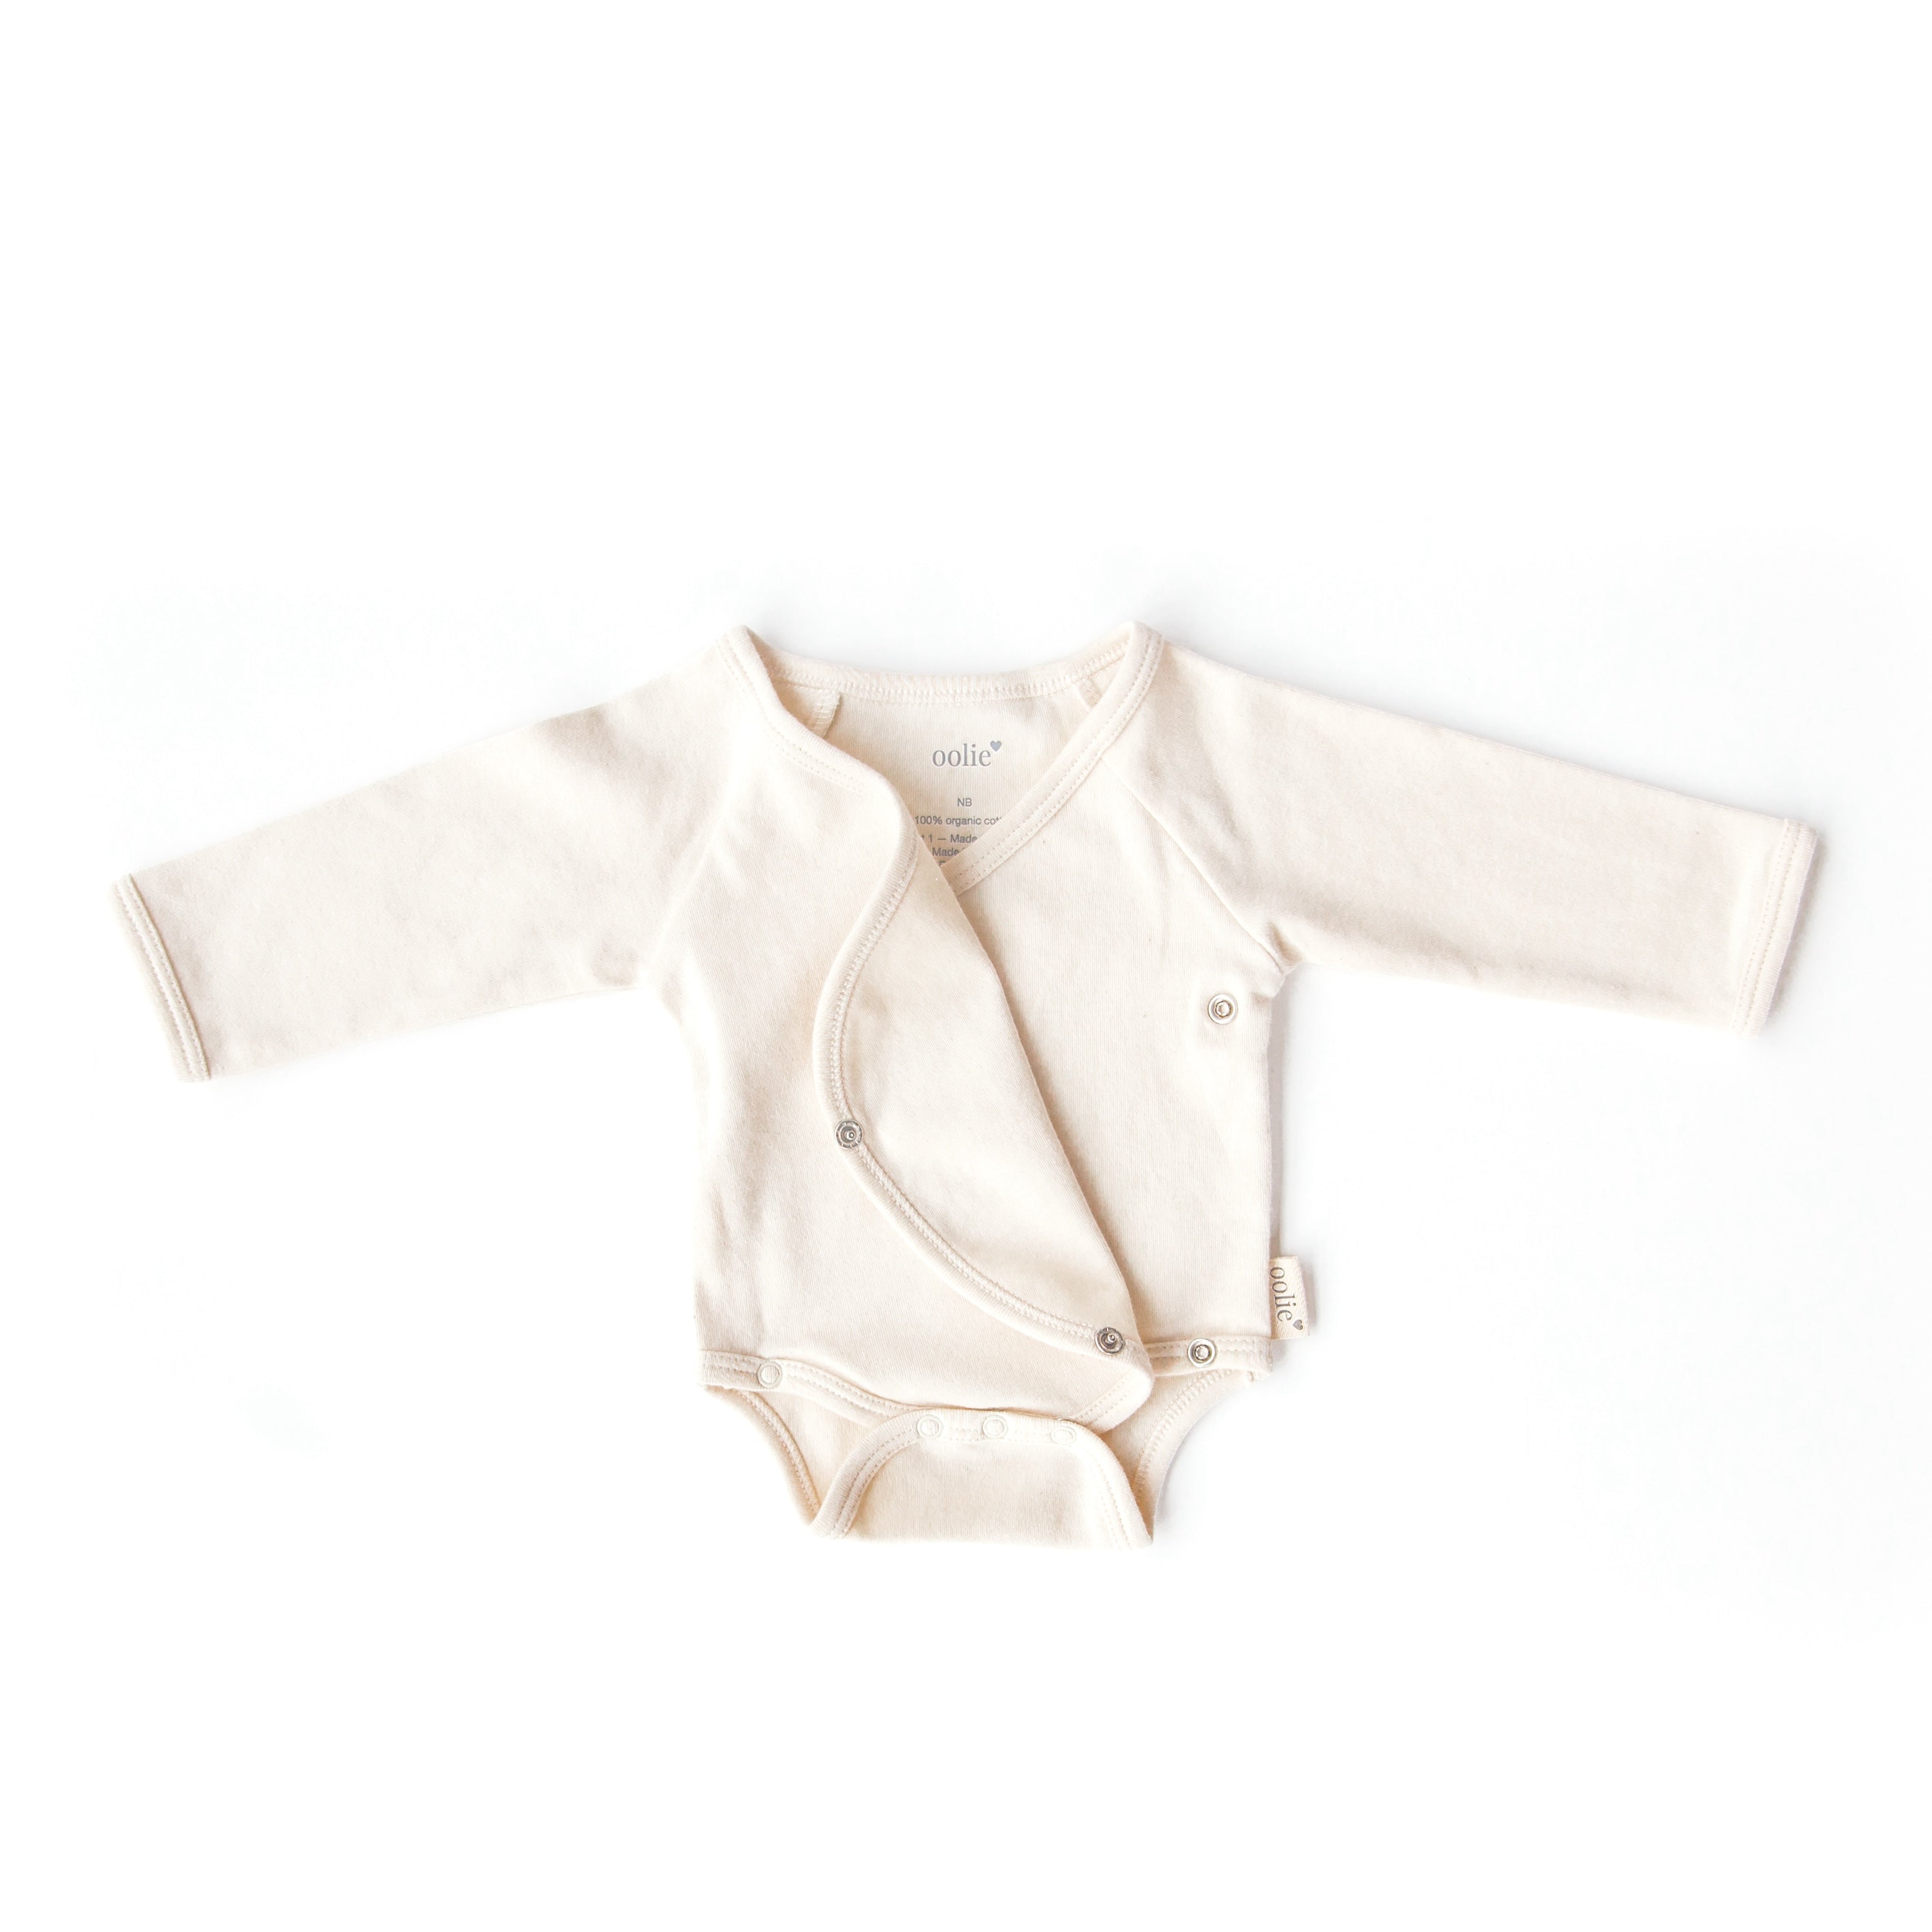 A natural color, Oolie organic cotton onesie, laid flat on a white background, with initial snaps unsnapped and the onesie's front flap folded back, kimono-style.